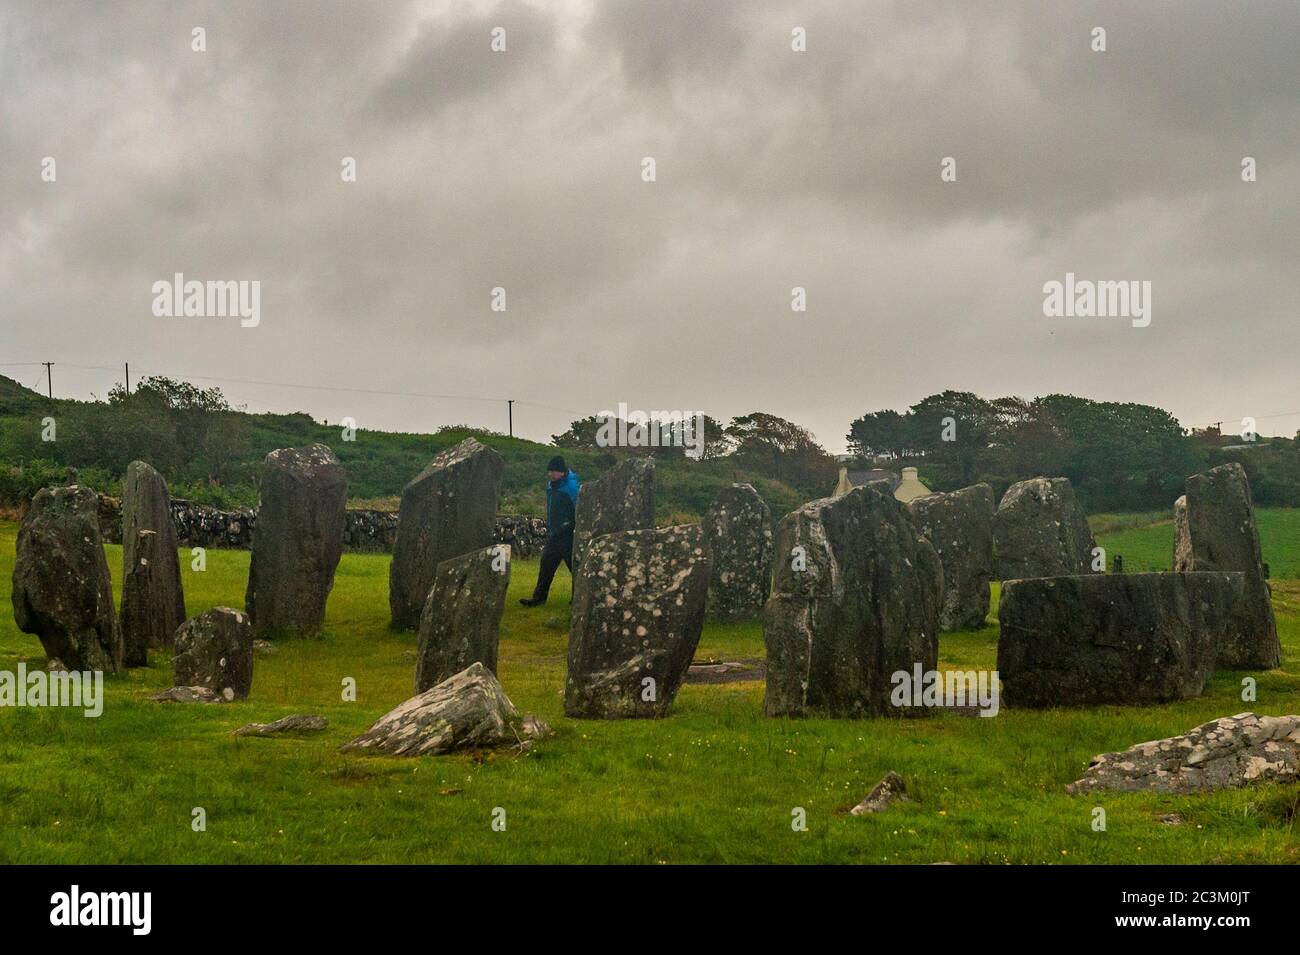 Glandore, West Cork, Ireland. 21st June, 2020. The sun rises behind cloud cover over the Drombeg Stone Circle marking the start of the summer solstice, the longest day of the year. The Drombeg Stone Circle, also known as The Druid's Altar, is a Megalithic stone circle. Credit: AG News/Alamy Live News Stock Photo